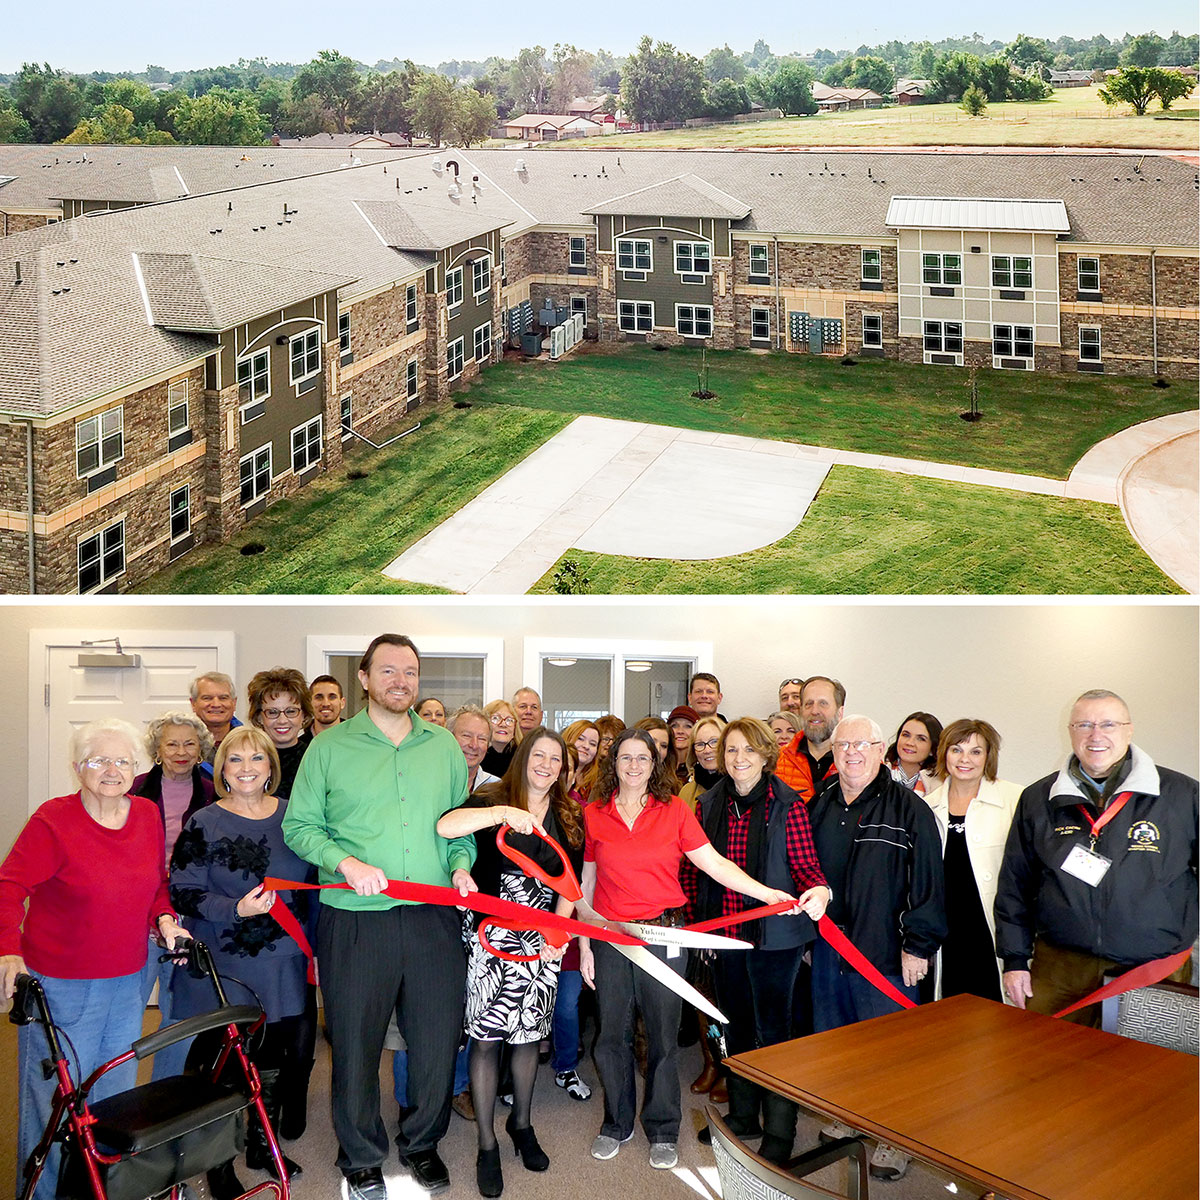 GRAND OPENING: THE RESIDENCE AT YUKON HILLS APARTMENTS